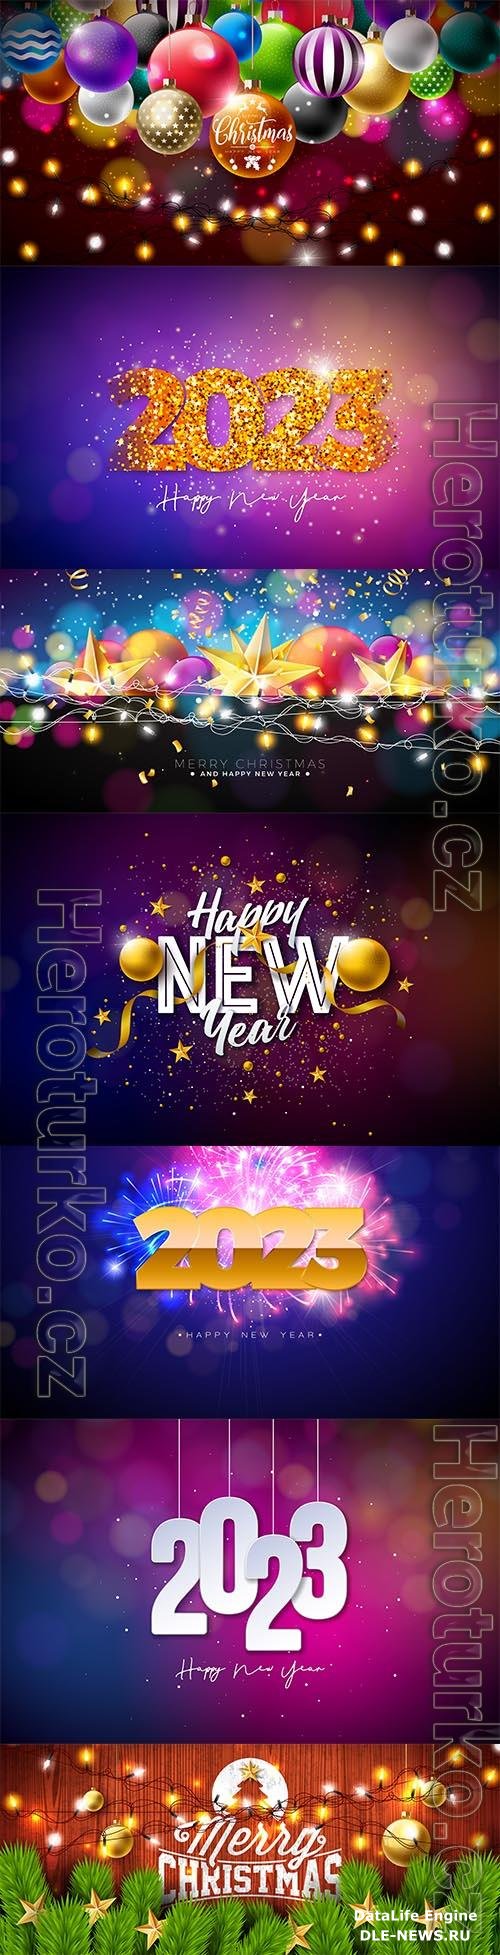 Merry christmas and happy new year illustration with gold star glass ball and lights garland